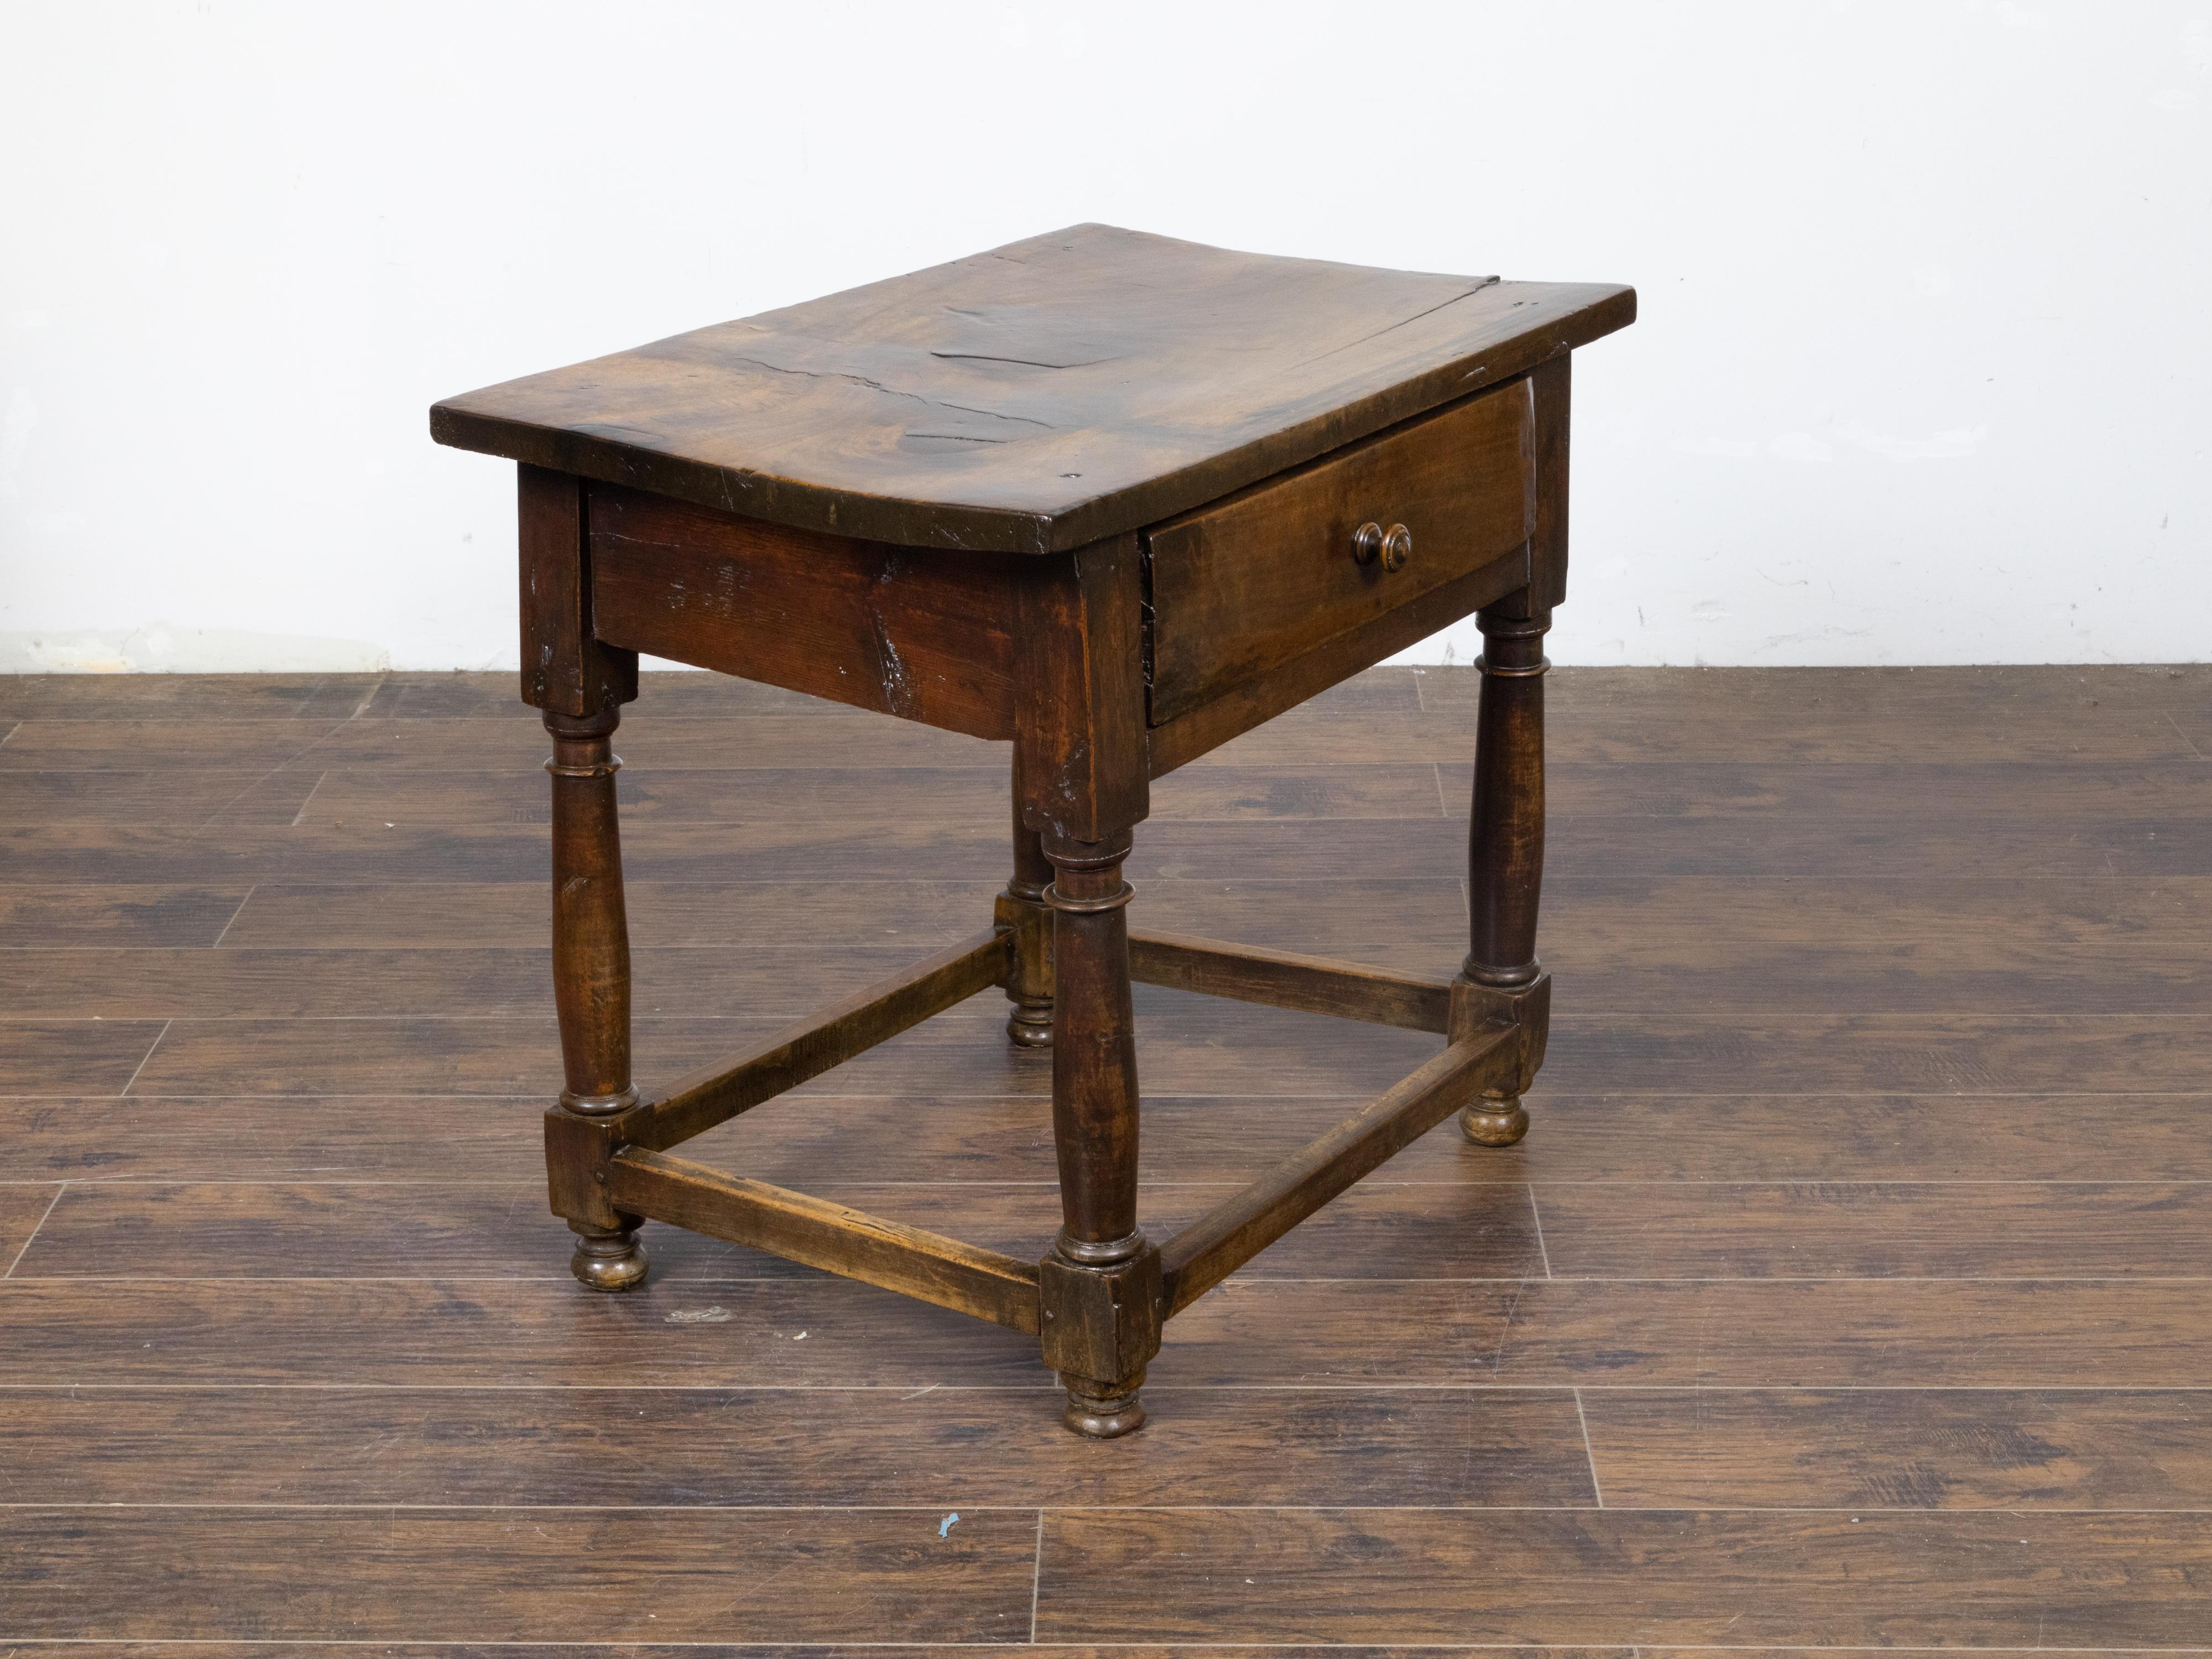 An English walnut table from the 19th century with single drawer, column-shaped legs on bun feet, plain side stretchers and nicely aged patina. This English walnut table hails from the 19th century and emanates a timeless elegance that promises to